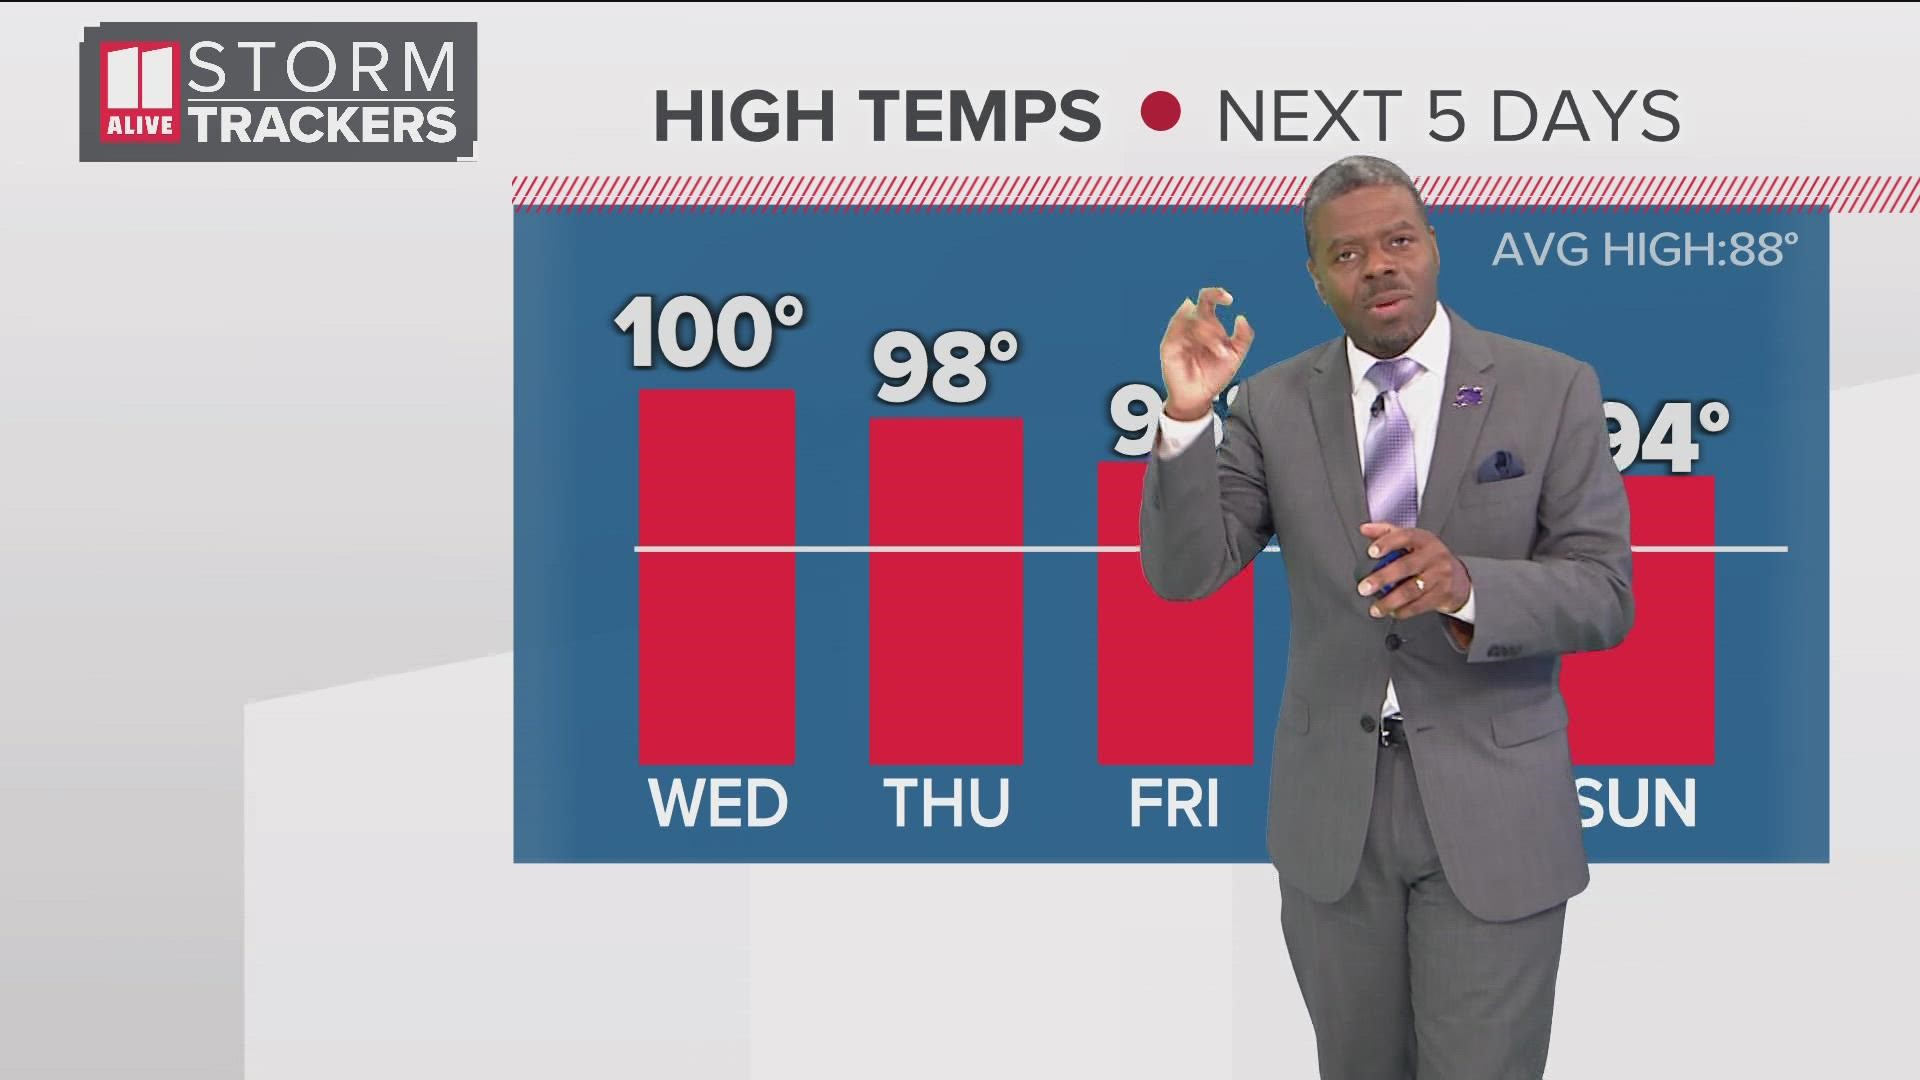 The last time Atlanta hit 100 degrees was August 13, 2019, and the city has only hit the triple-digit mark 72 times since 1928.